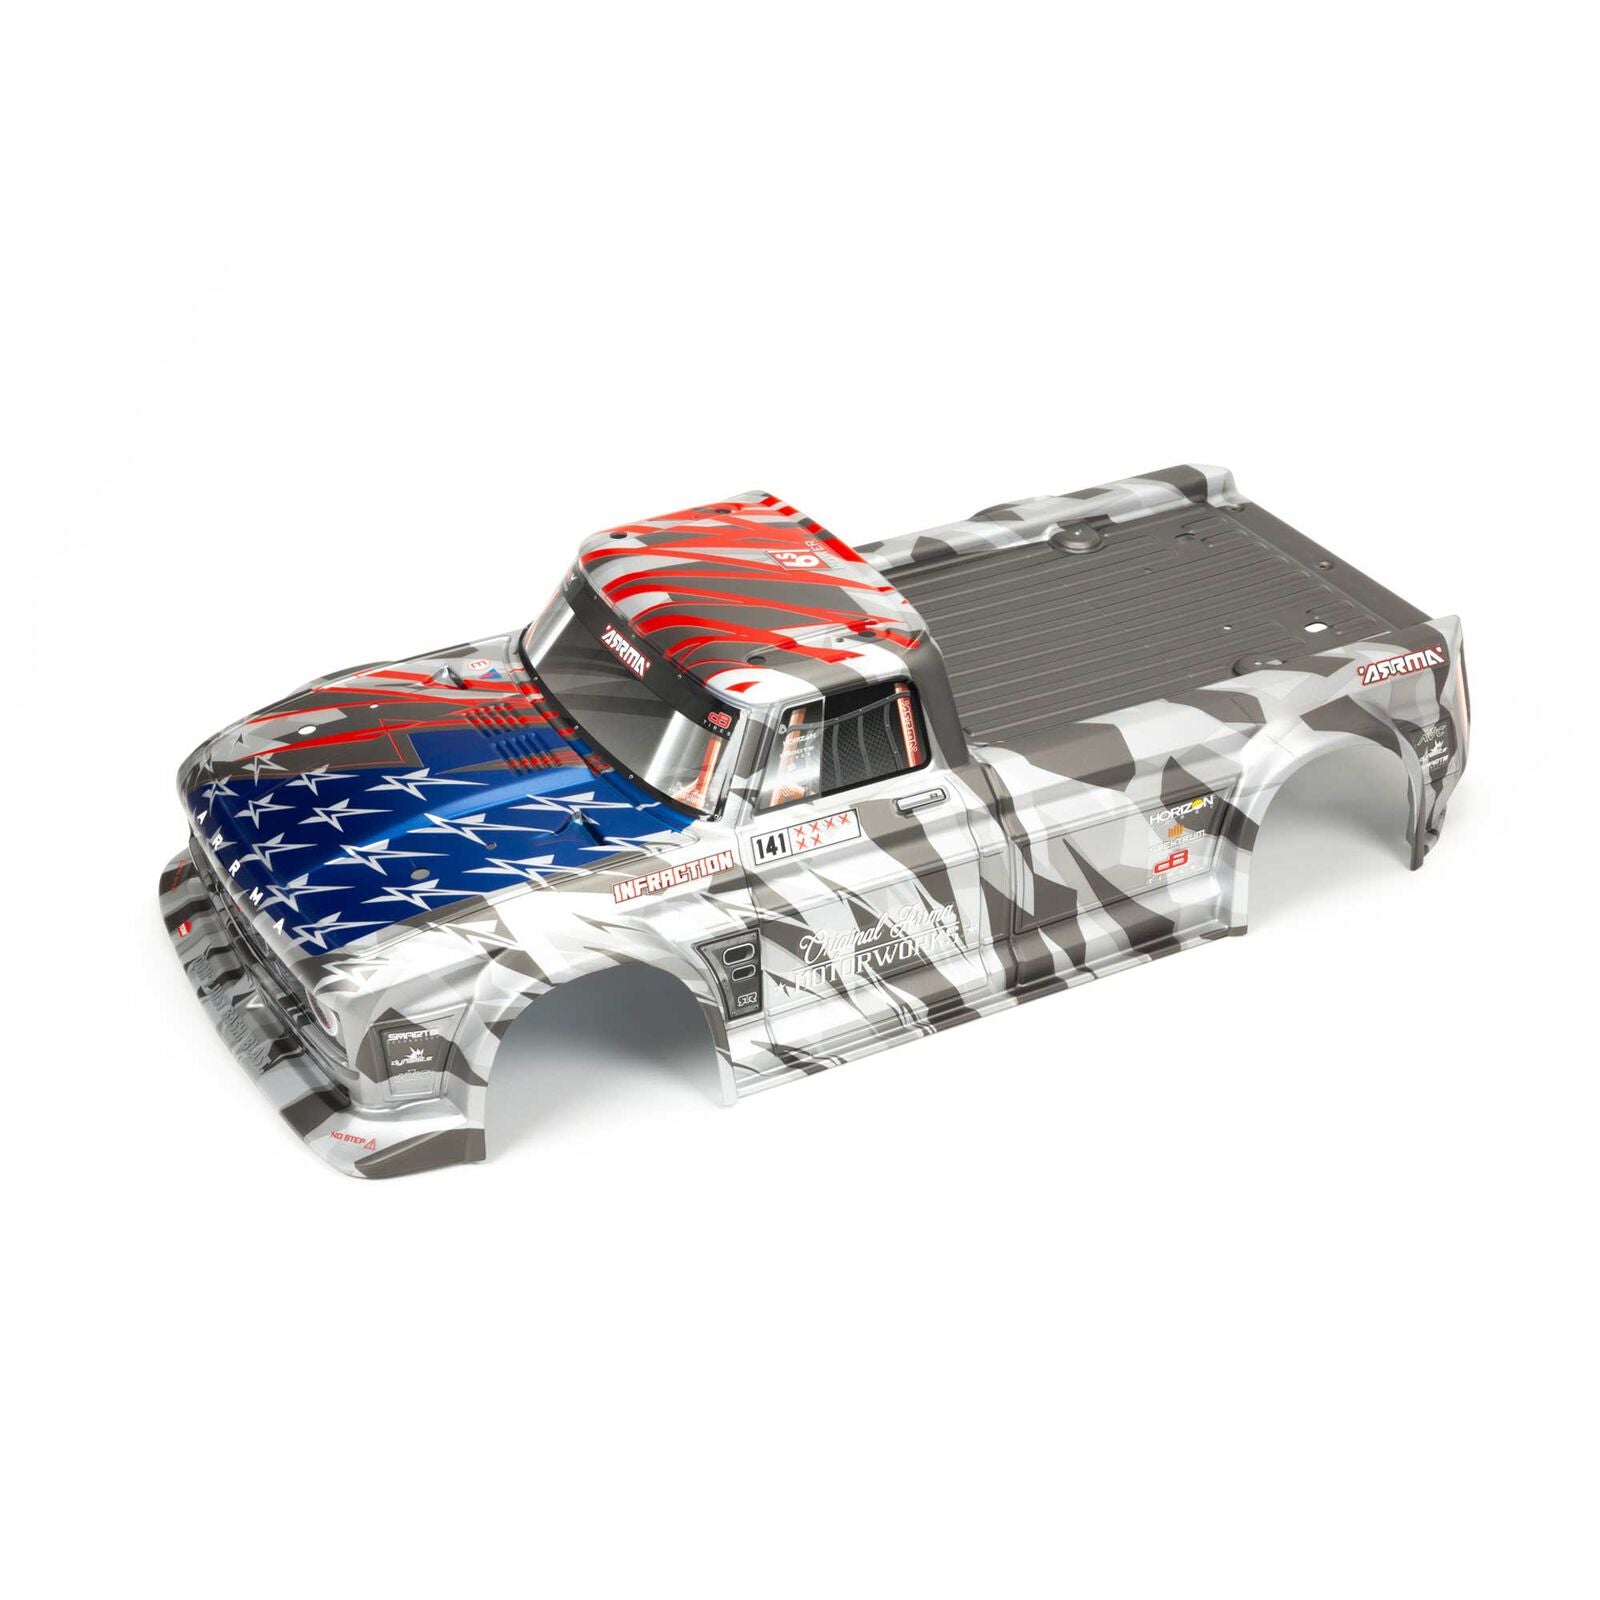 ARRMA ARA410006 Painted Body, Silver/Red: INFRACTION 6S BLX